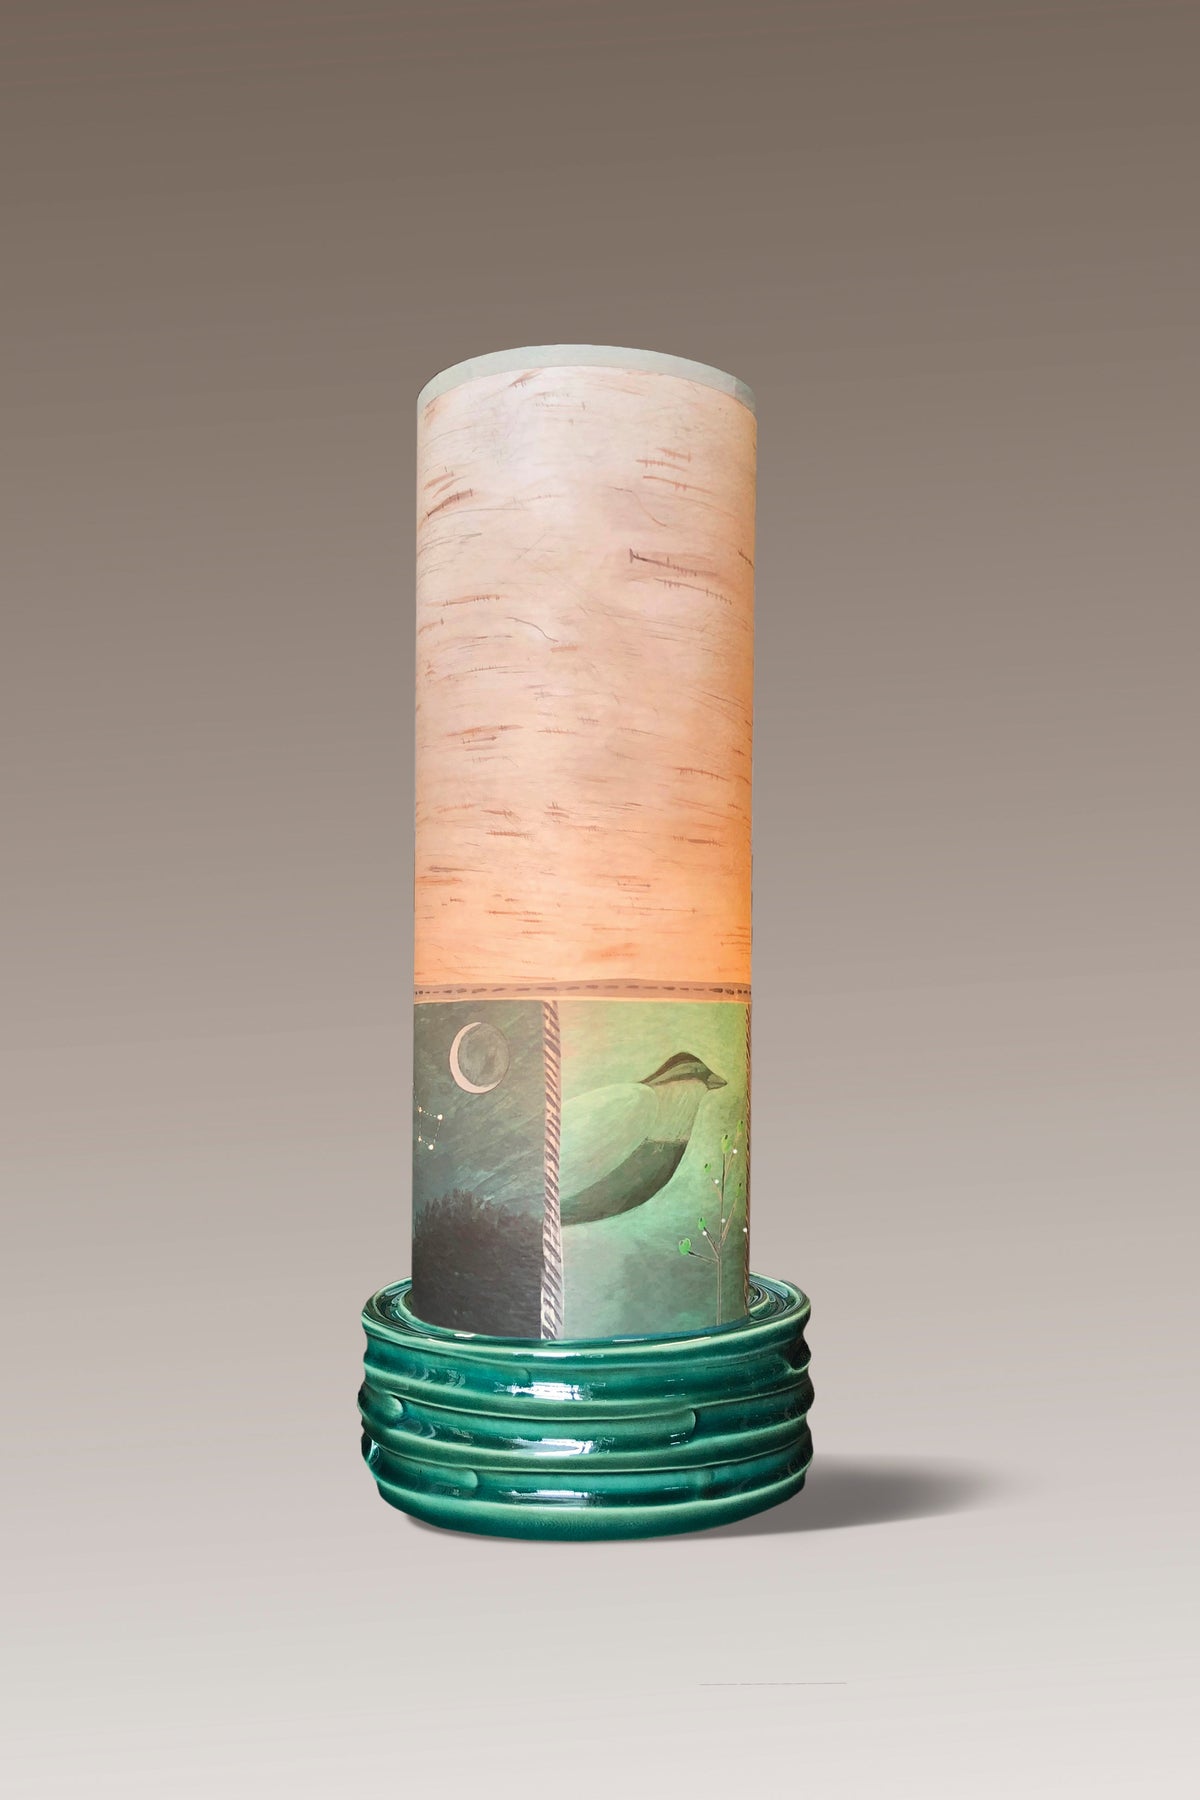 Ceramic Luminaire Accent Lamp with Woodland Trails in Birch Shade